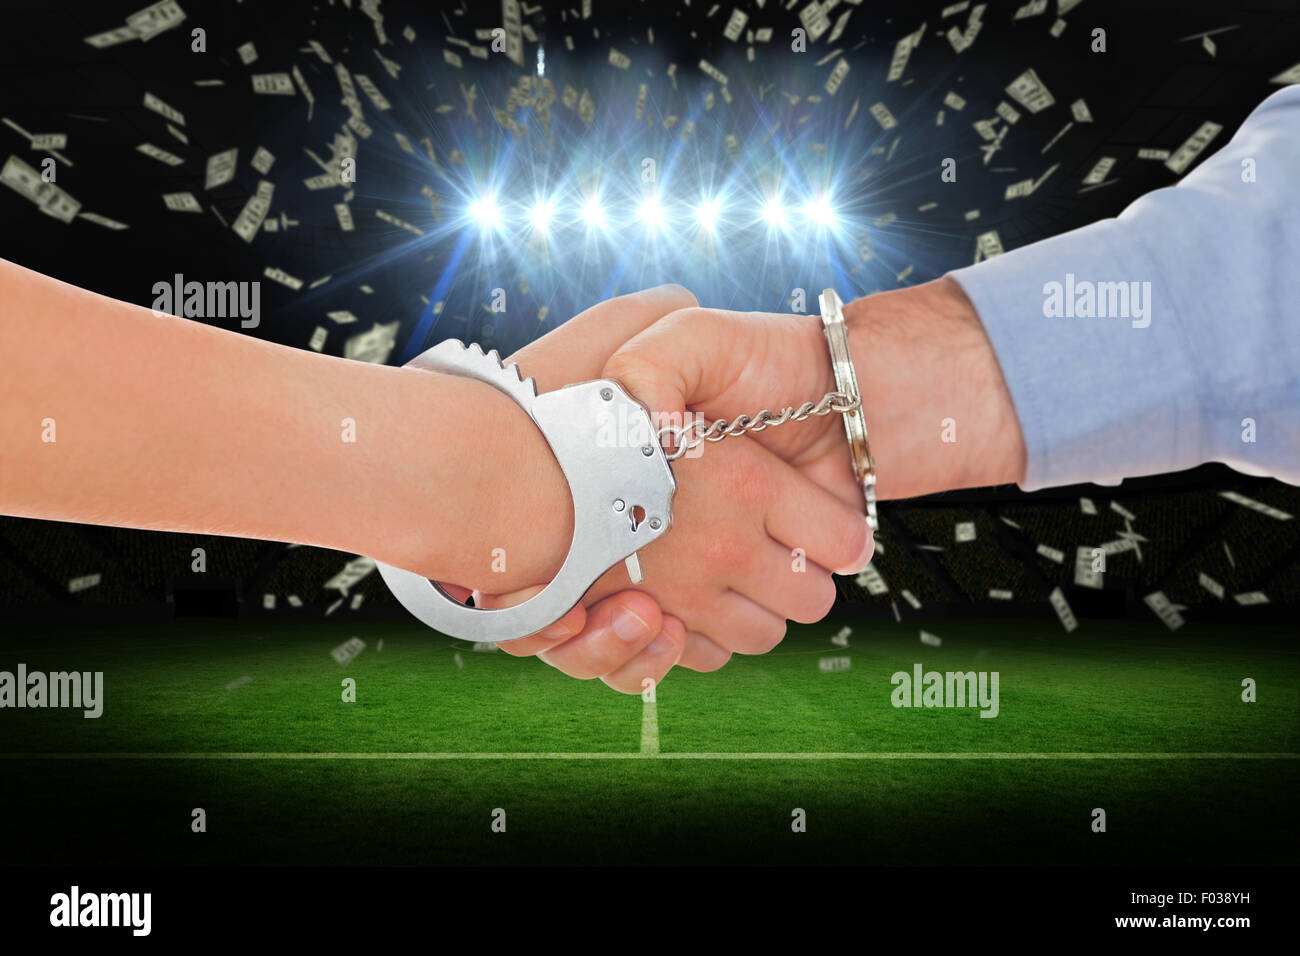 Composite image of handcuffed business people shaking hands Stock Photo